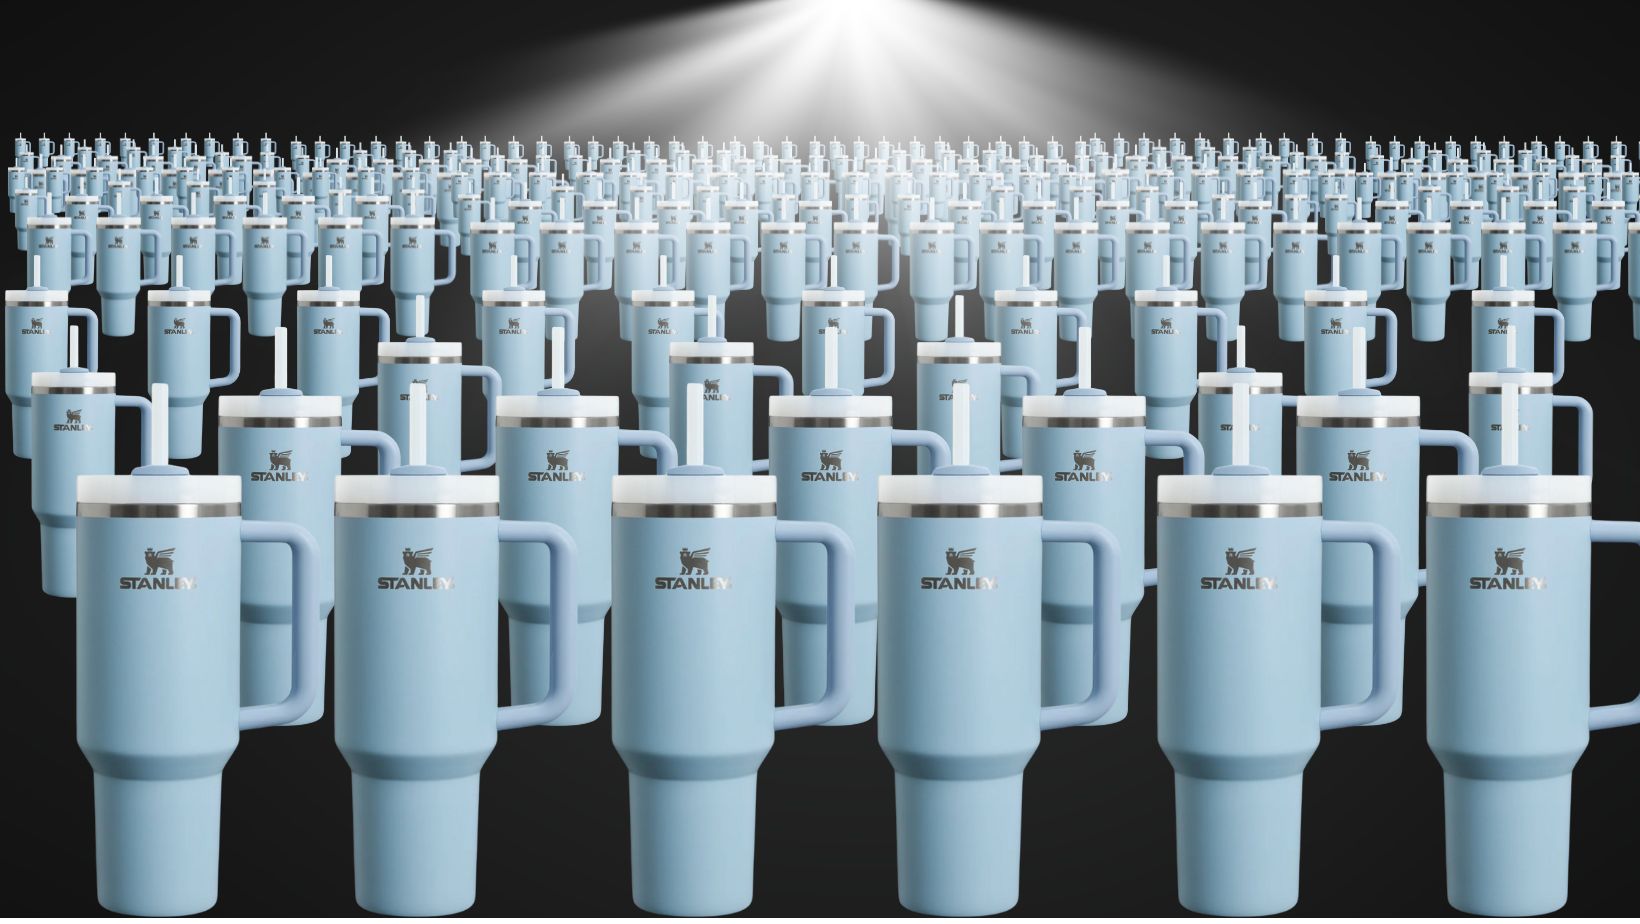 All hail our supreme water-bottle overlords.